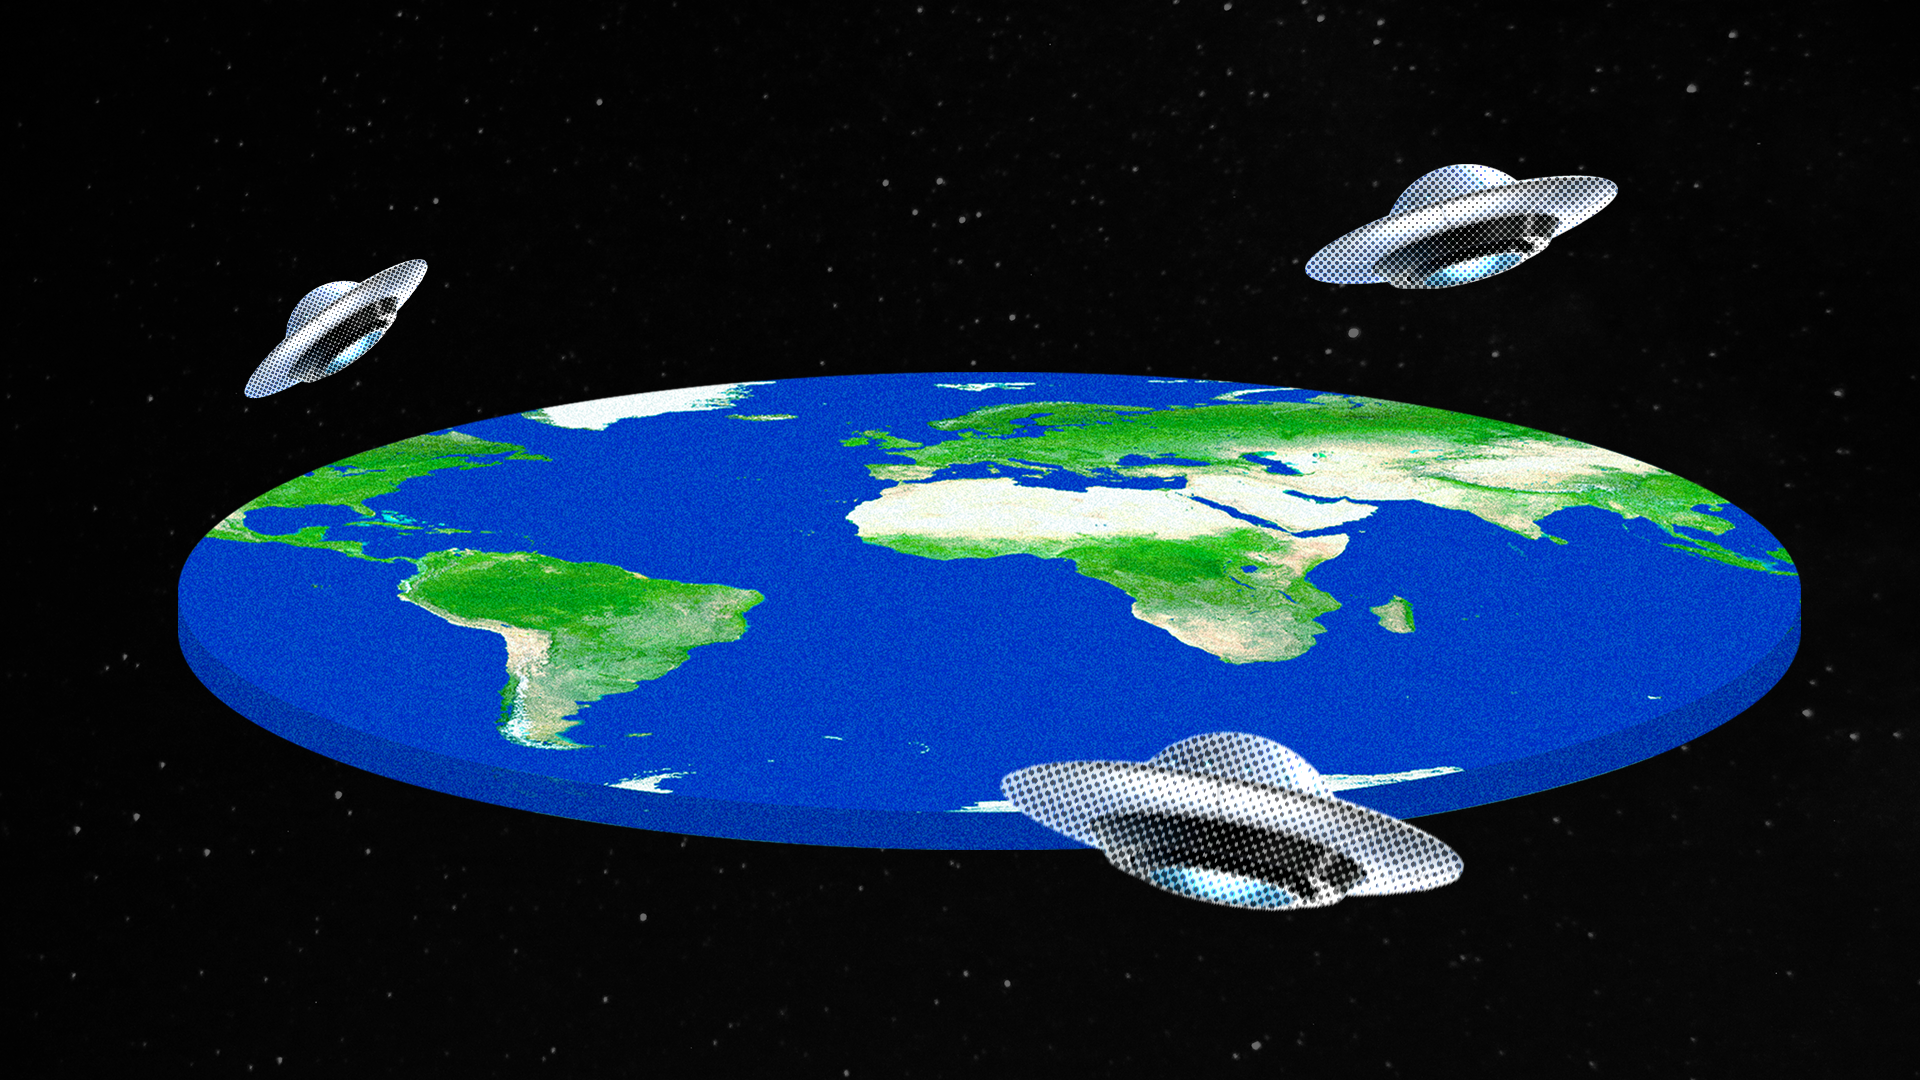 A flat earth surrounded by flying saucers